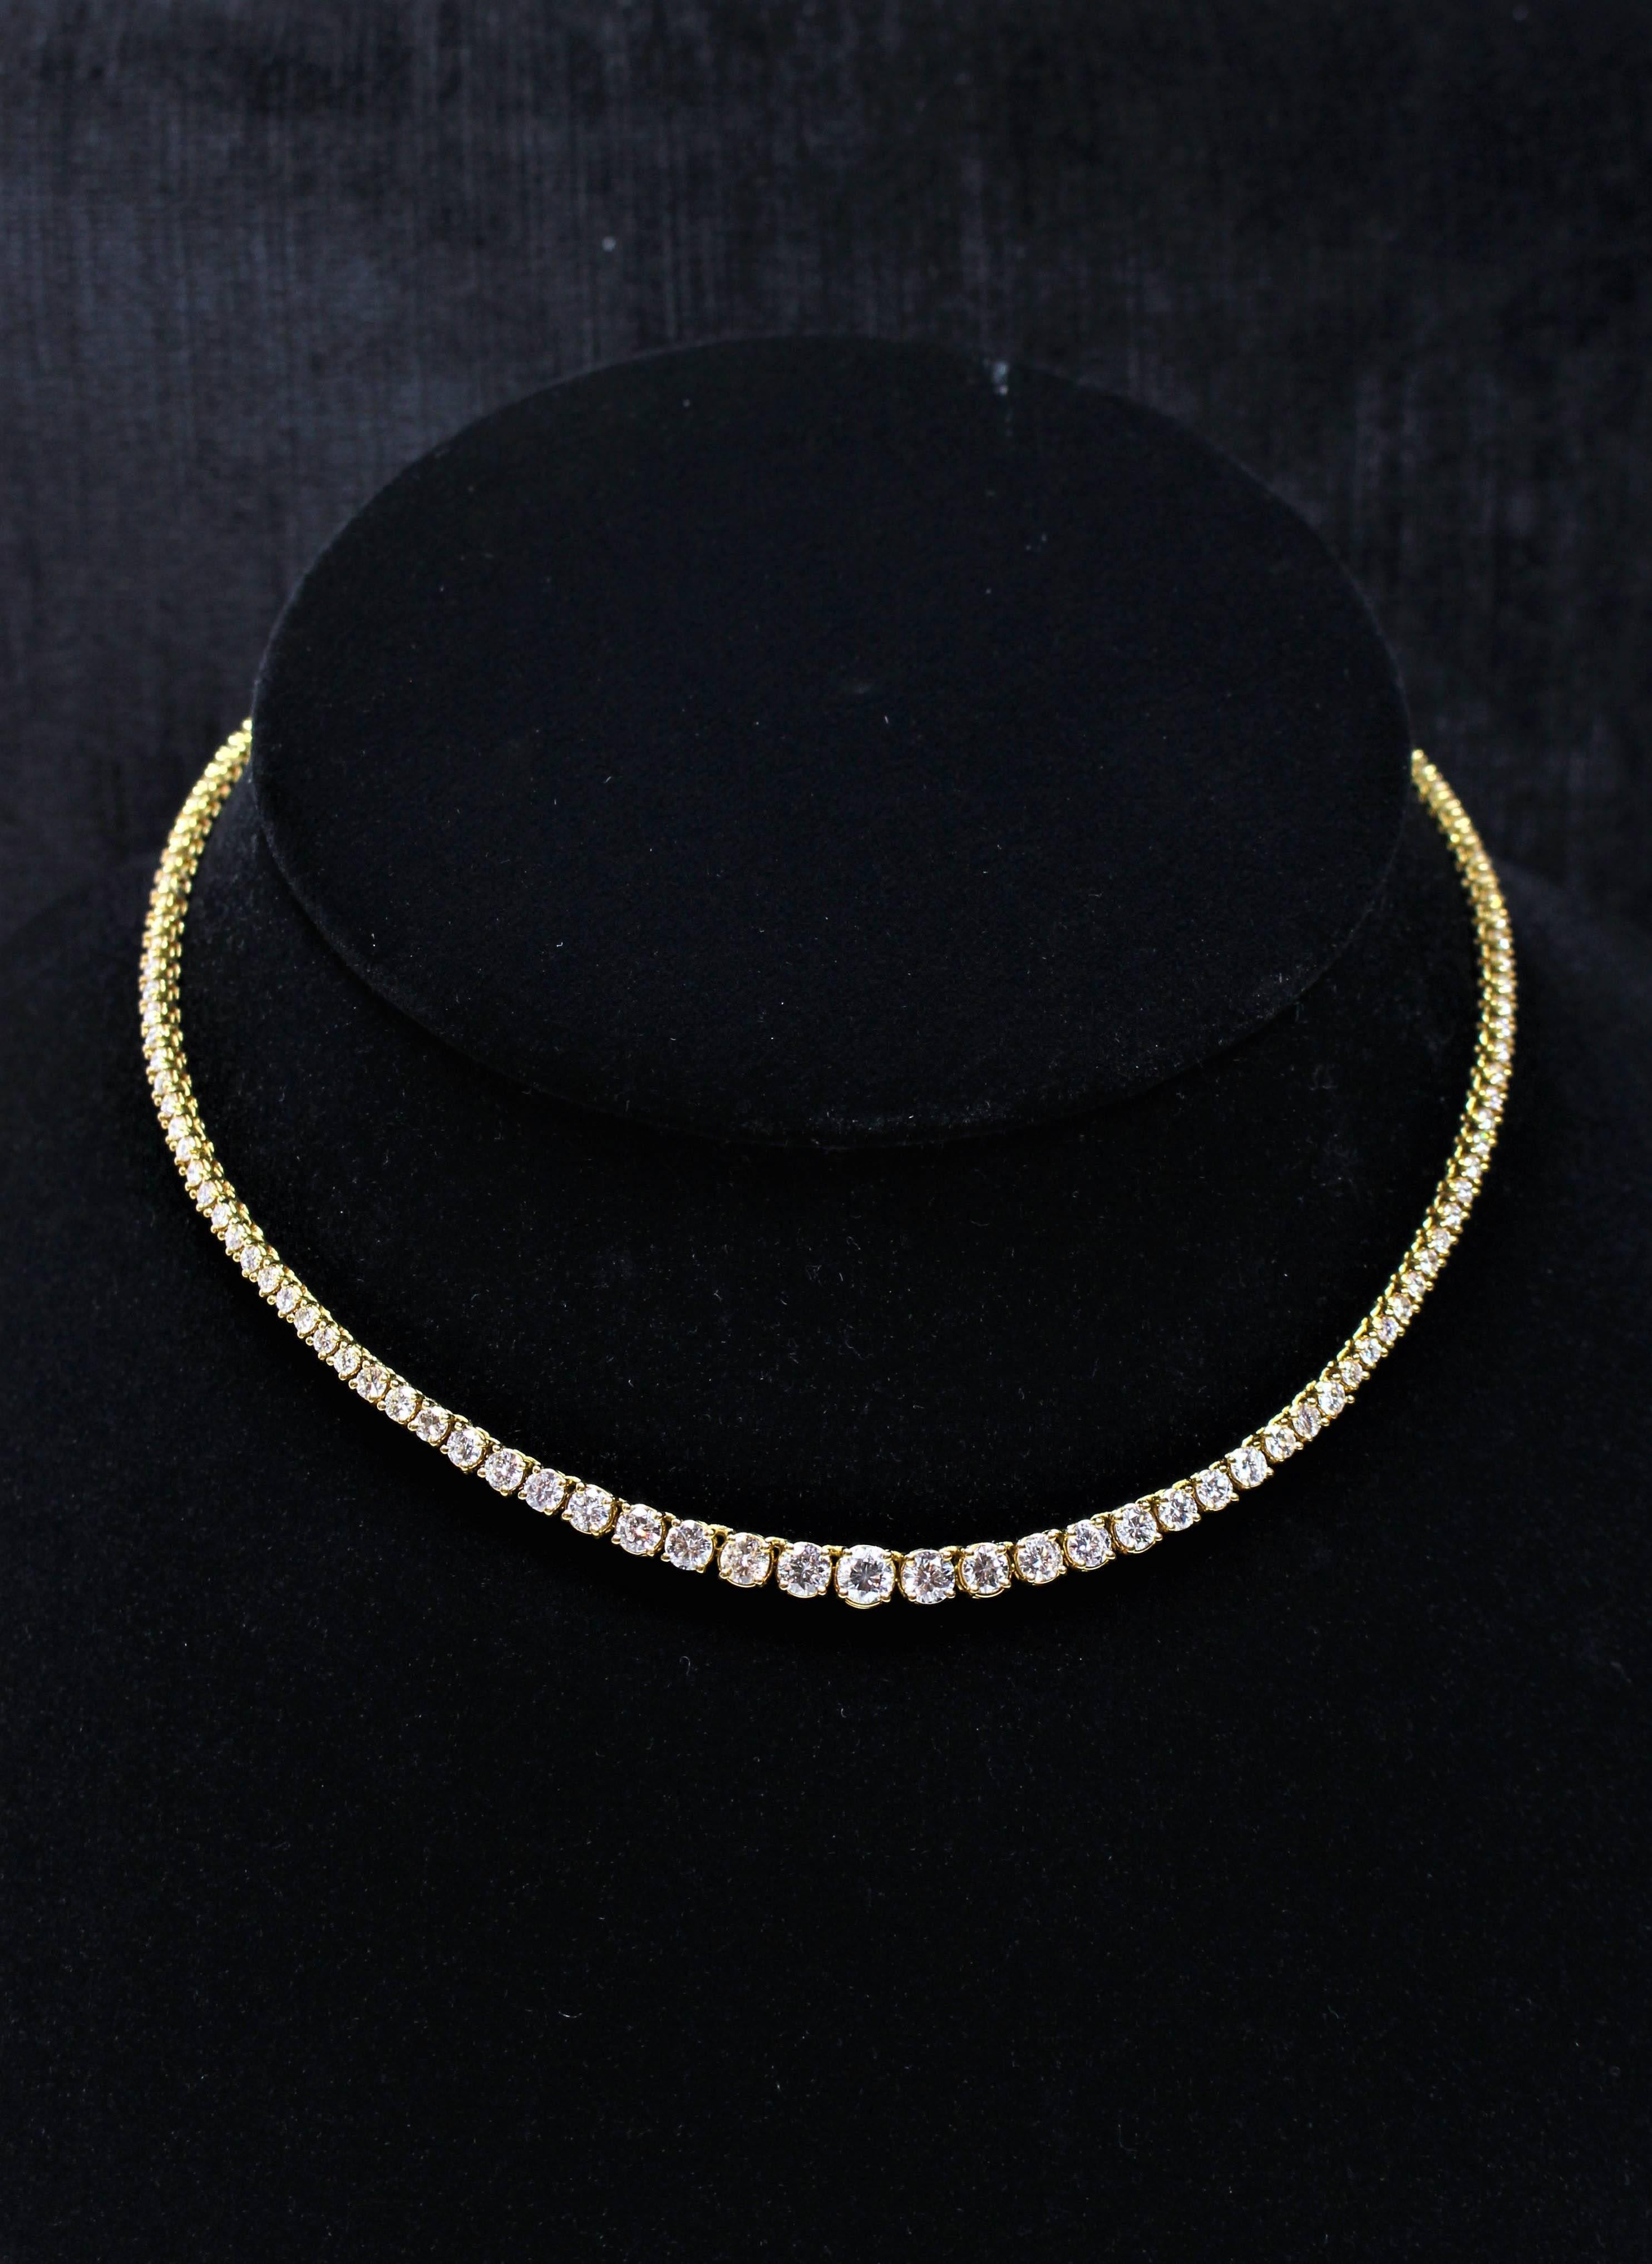 This necklace is composed of 18KT yellow gold with stunning round cut diamonds. Features a Riviere design with graduated diamonds. A beautiful classic style. In excellent condition.

Please feel free to ask any questions you may have, we are happy